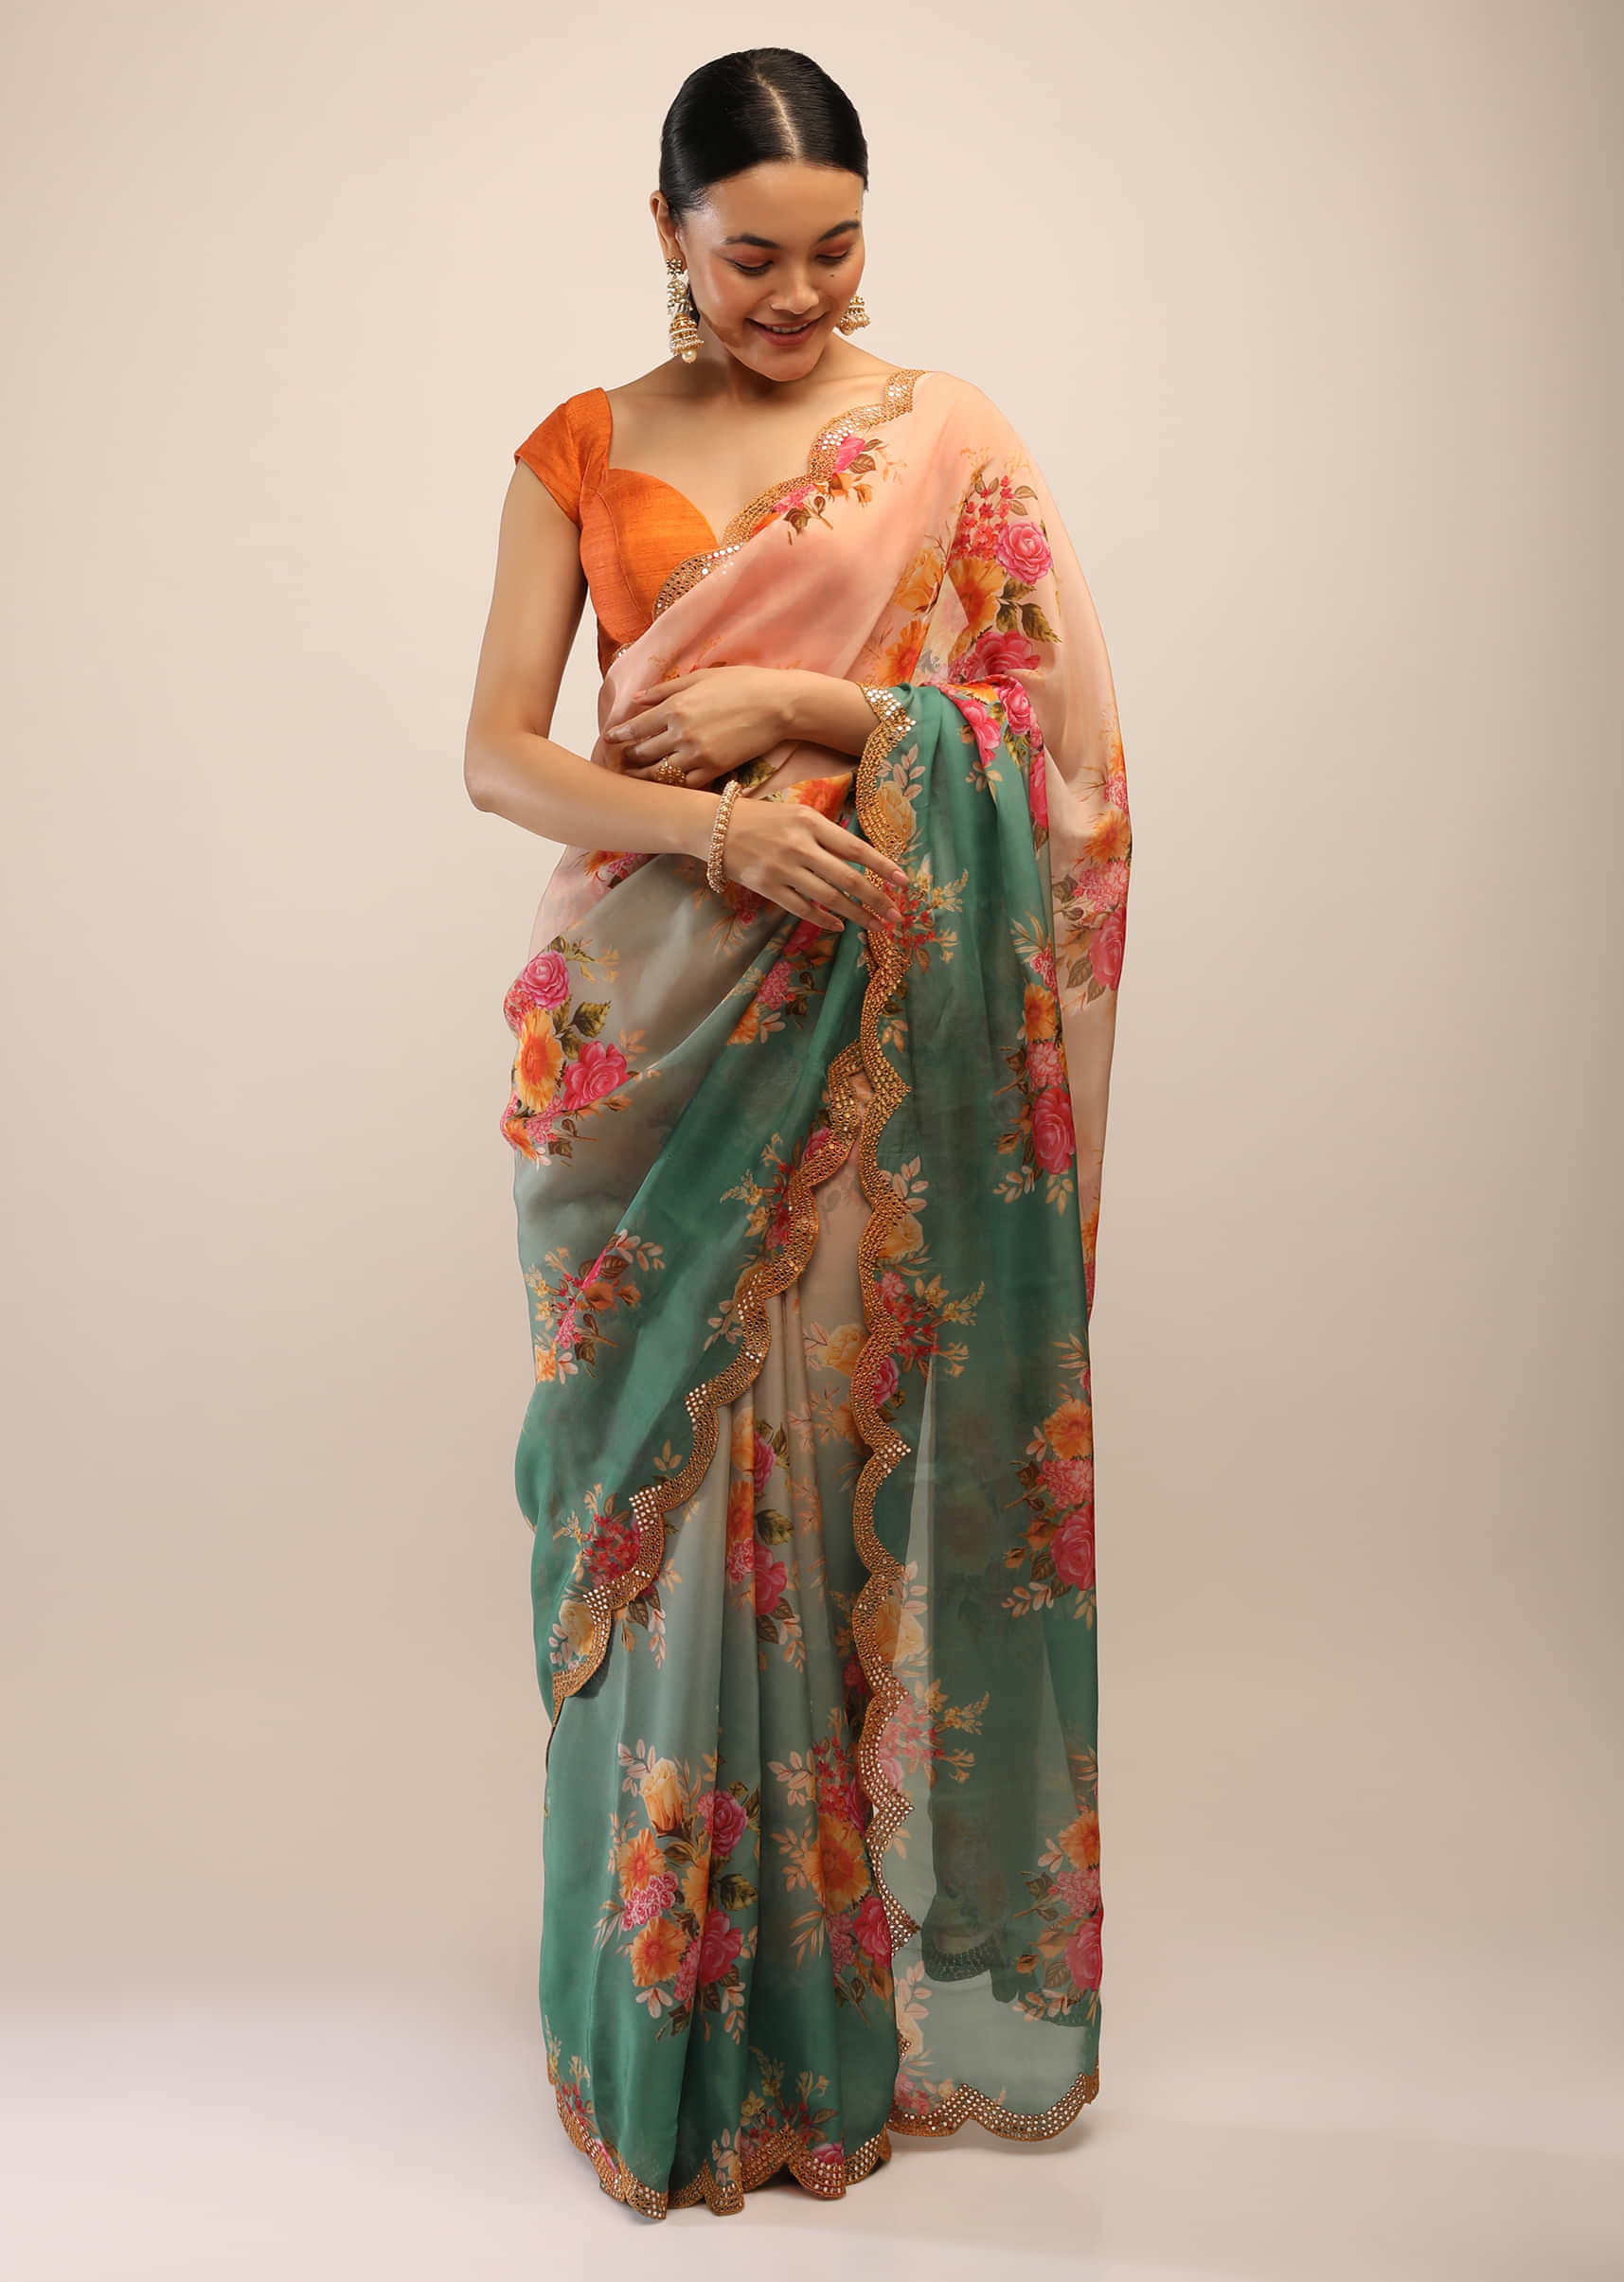 Jade Green And Peach Ombre Saree In Organza With Multi Colored Floral Print And Mirror Embellished Border